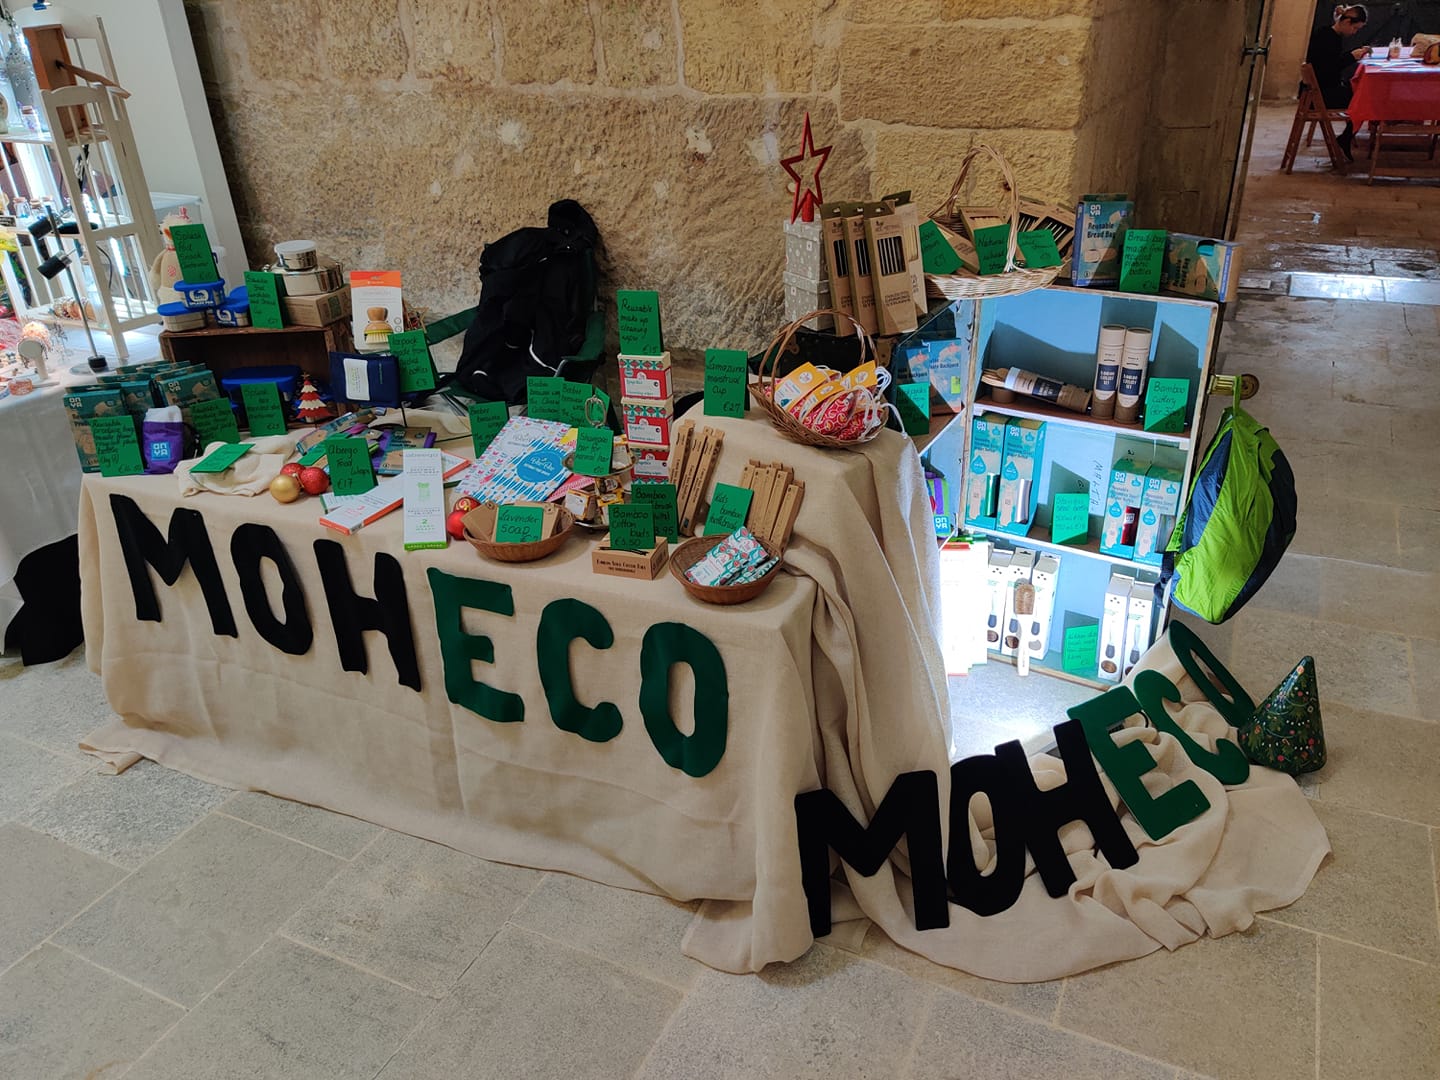 Moheco at its first ever Eco Christmas Market!